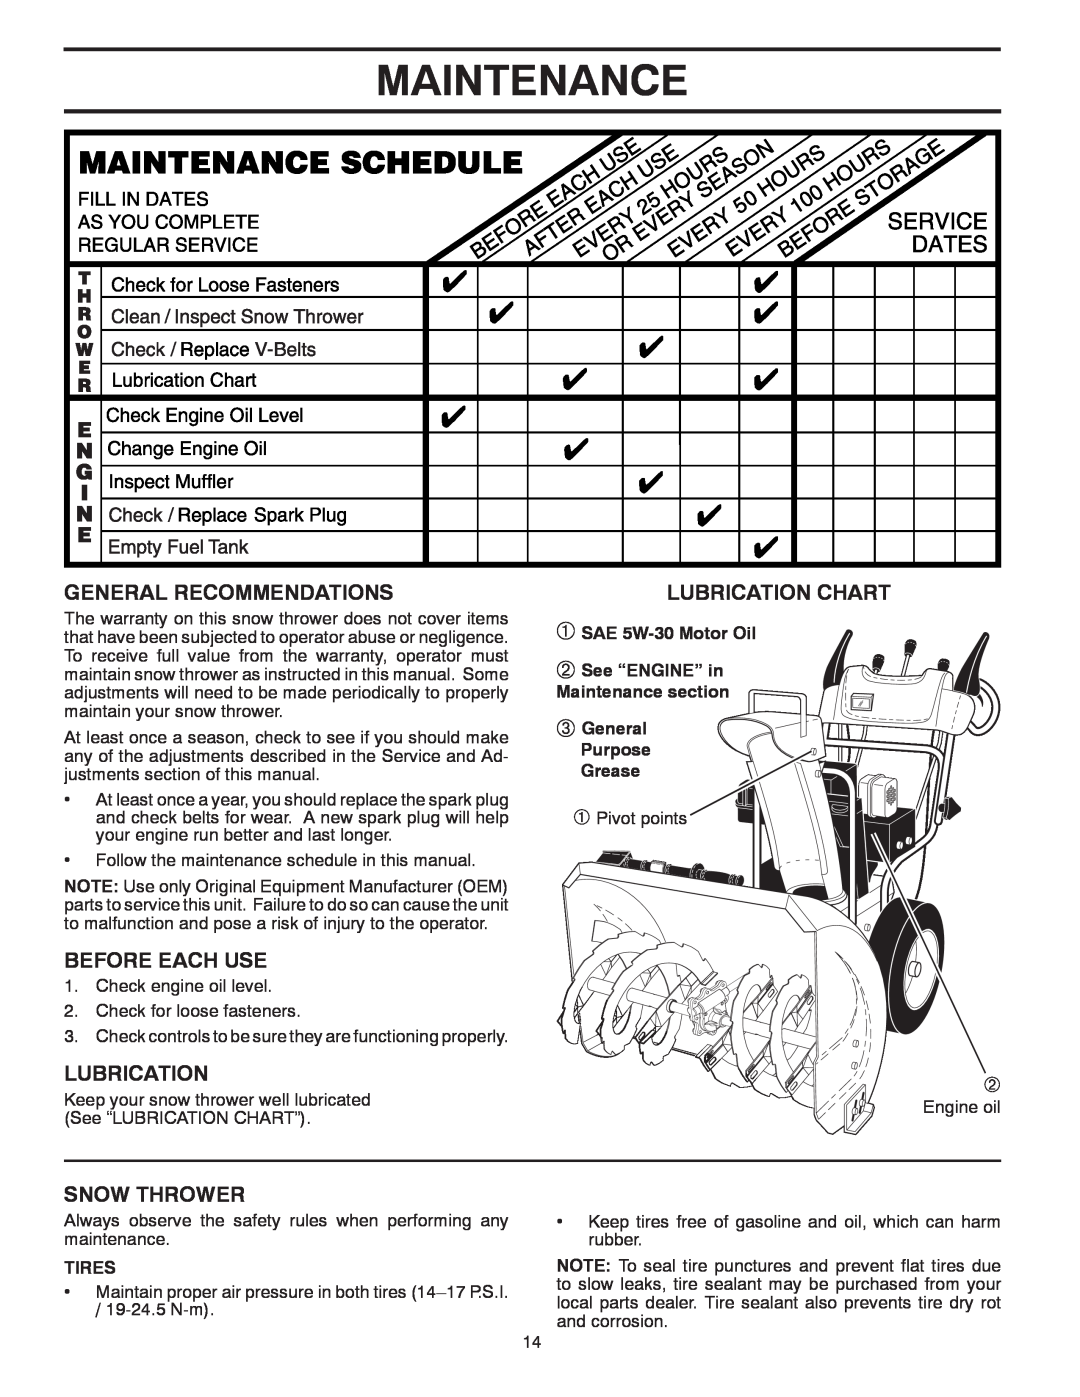 Poulan 96192002401 Maintenance, General Recommendations, Before Each Use, Snow Thrower, Lubrication Chart, Tires 